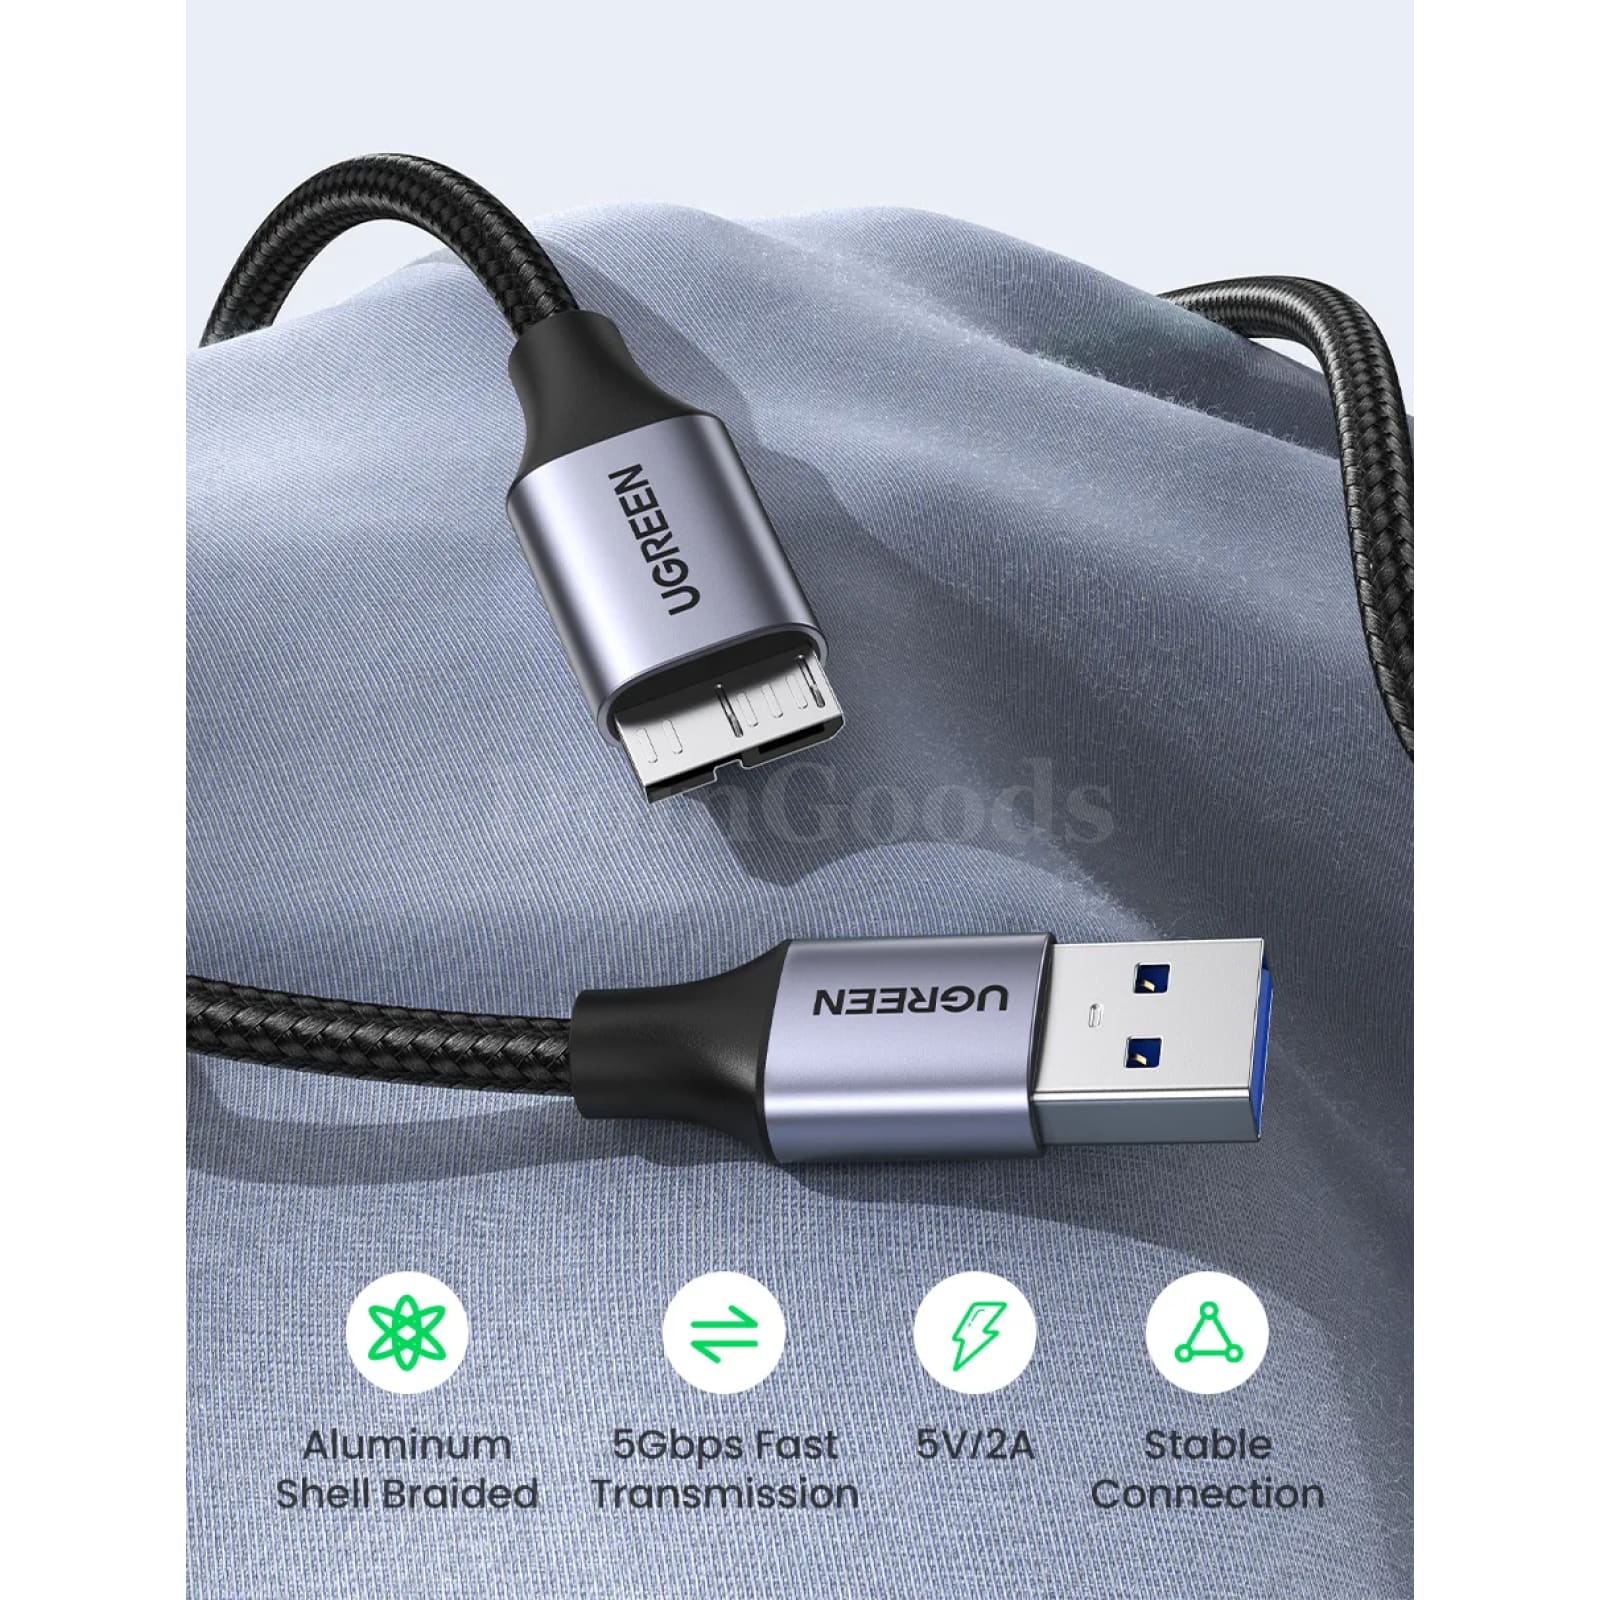 Ugreen Micro B Usb 3.0 Cable - 3A Fast Charging 5Gbps Data Transfer External Hdd And Ssd 301635